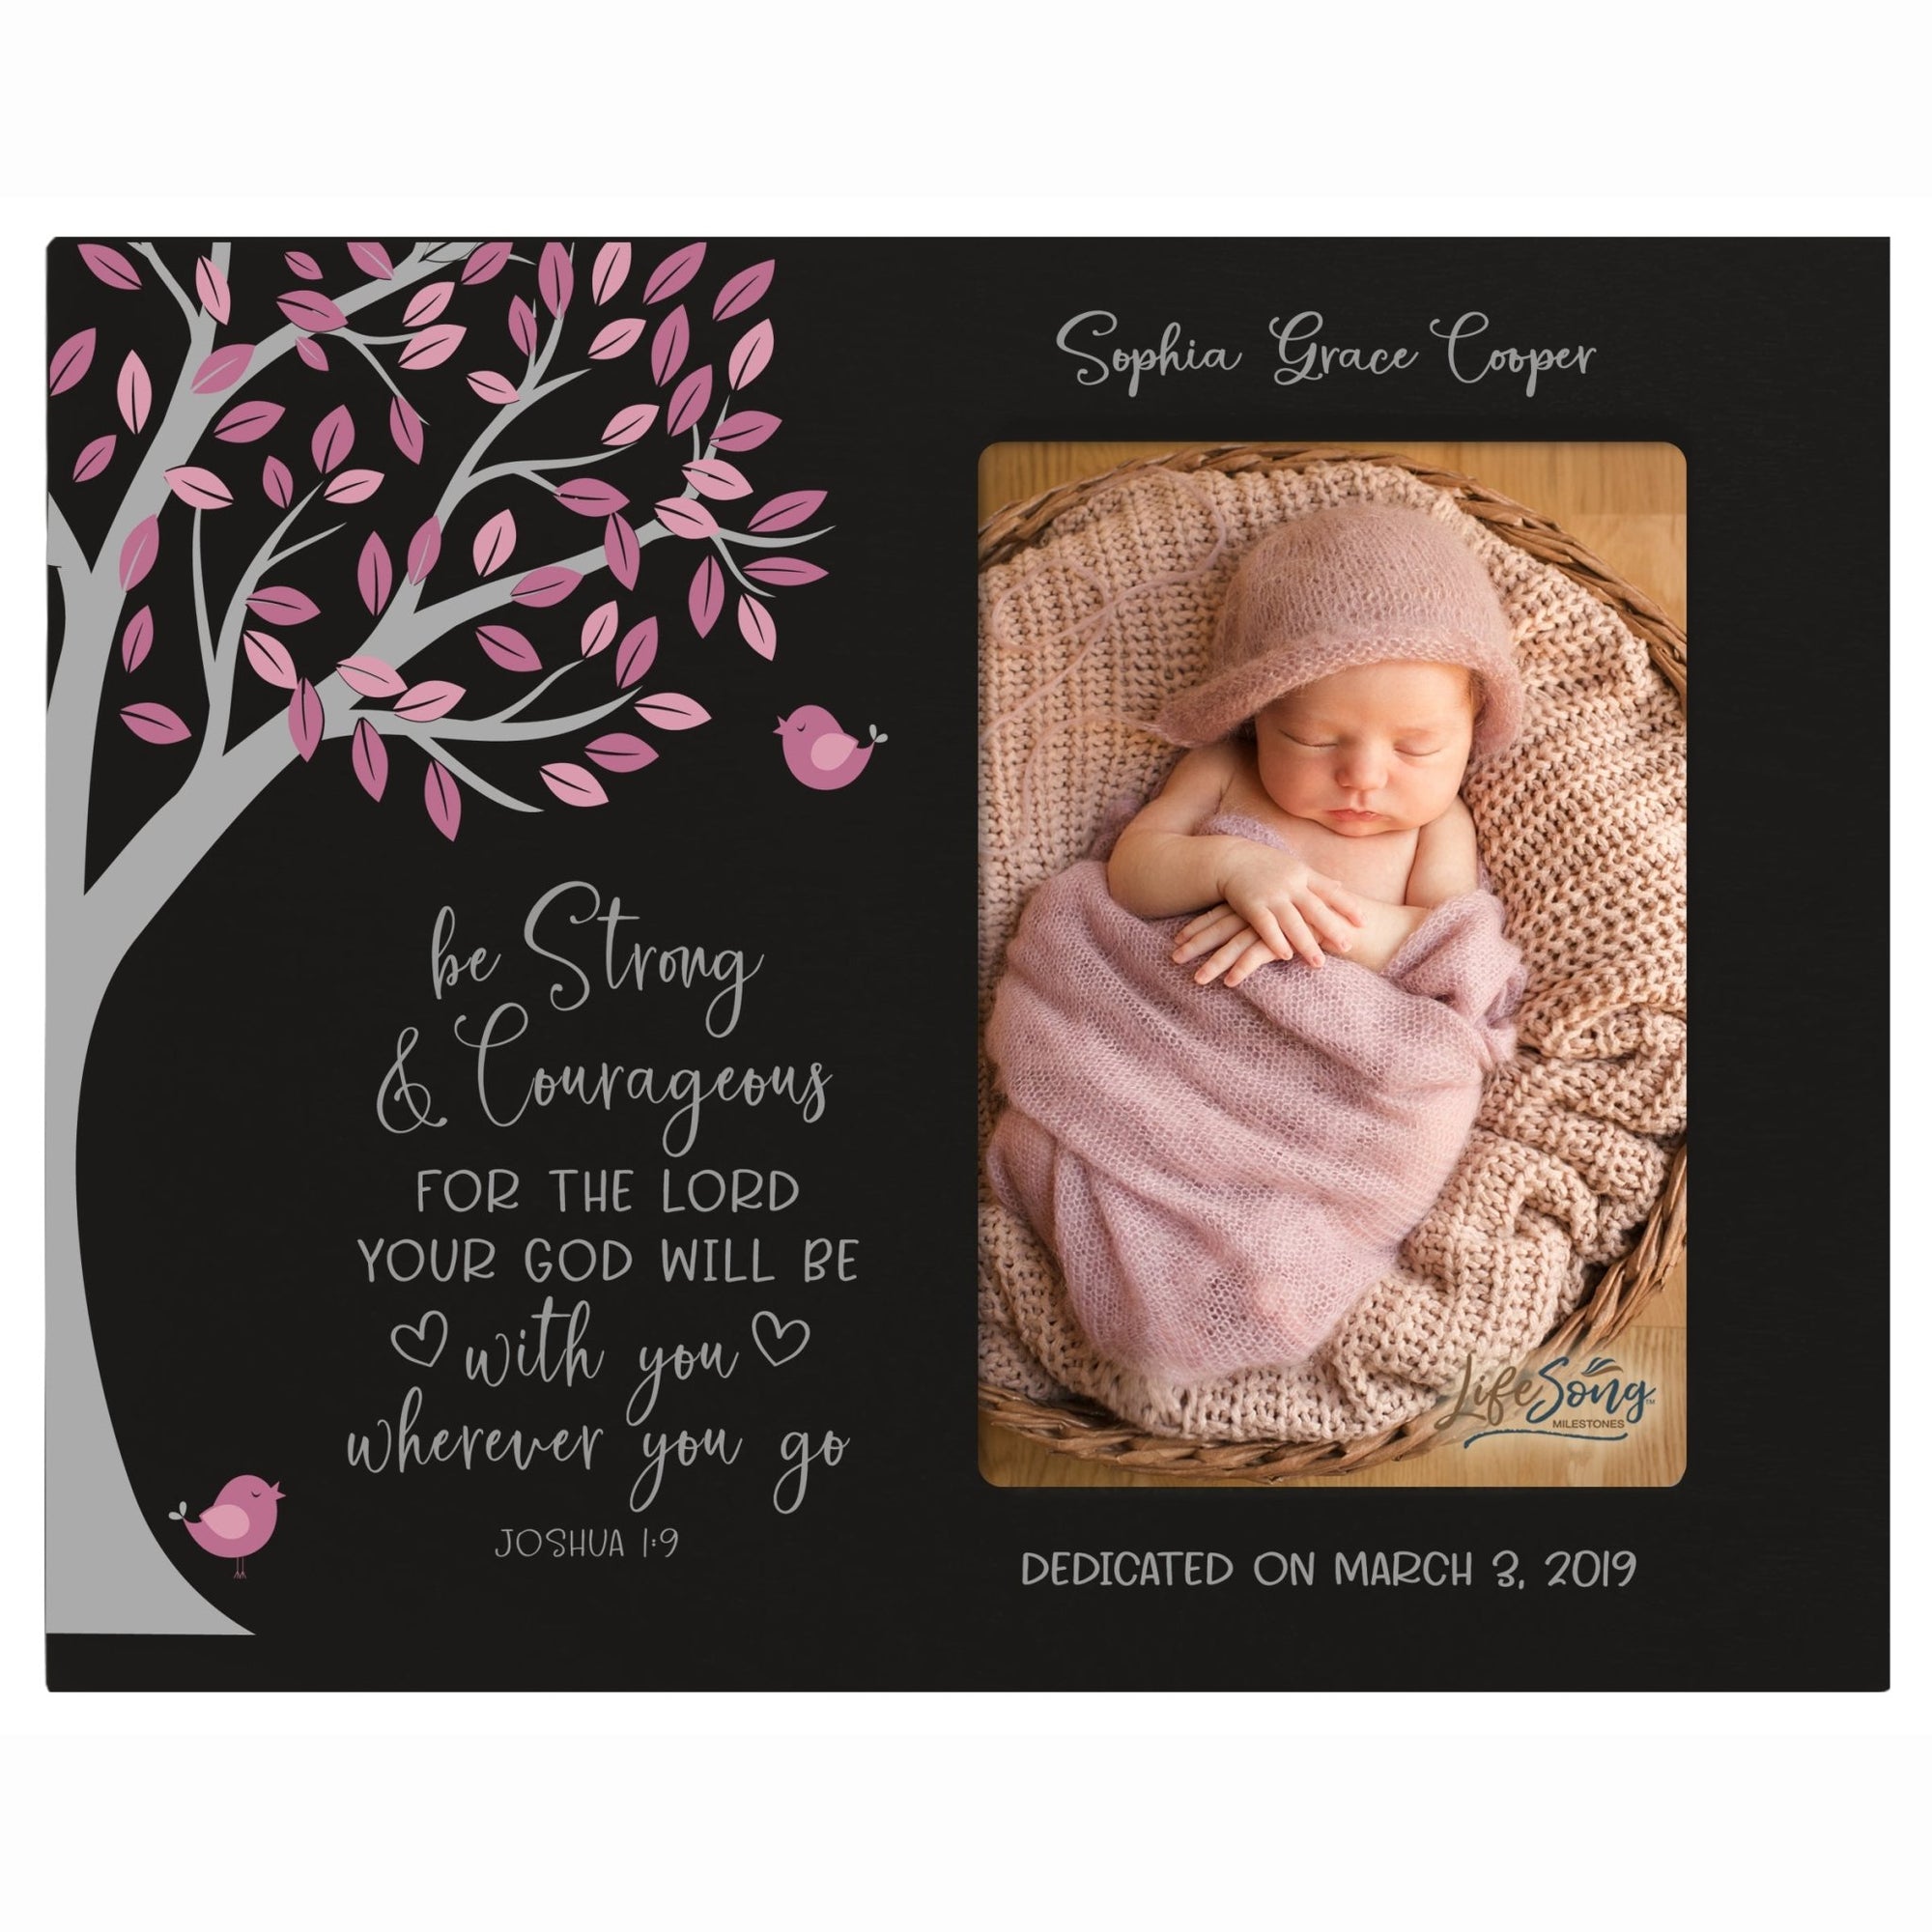 Personalized Baptism Blessing Frame For Newborn -May You Feel - LifeSong Milestones